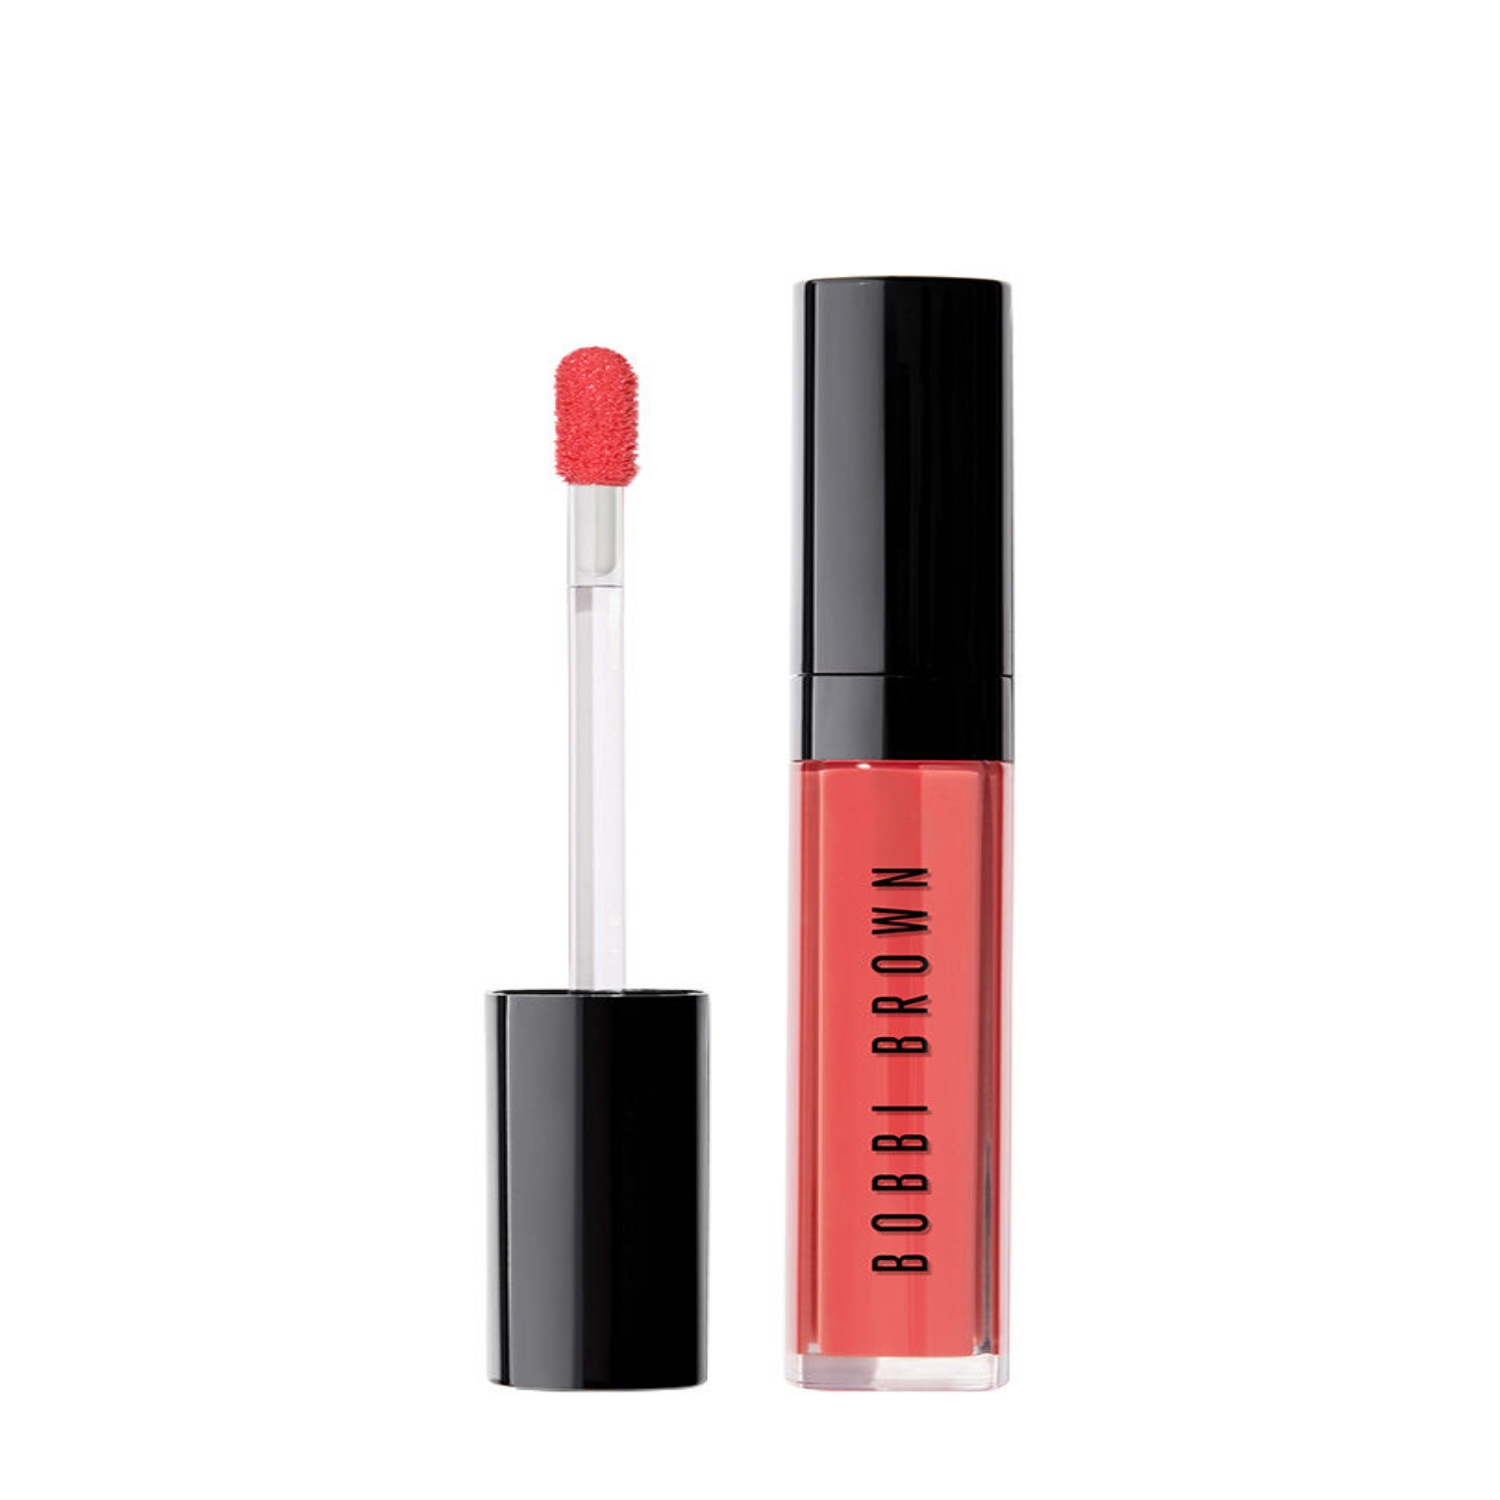 Bobbi Brown Crushed Oil Infused Lipgloss - Freestyle (6ml)